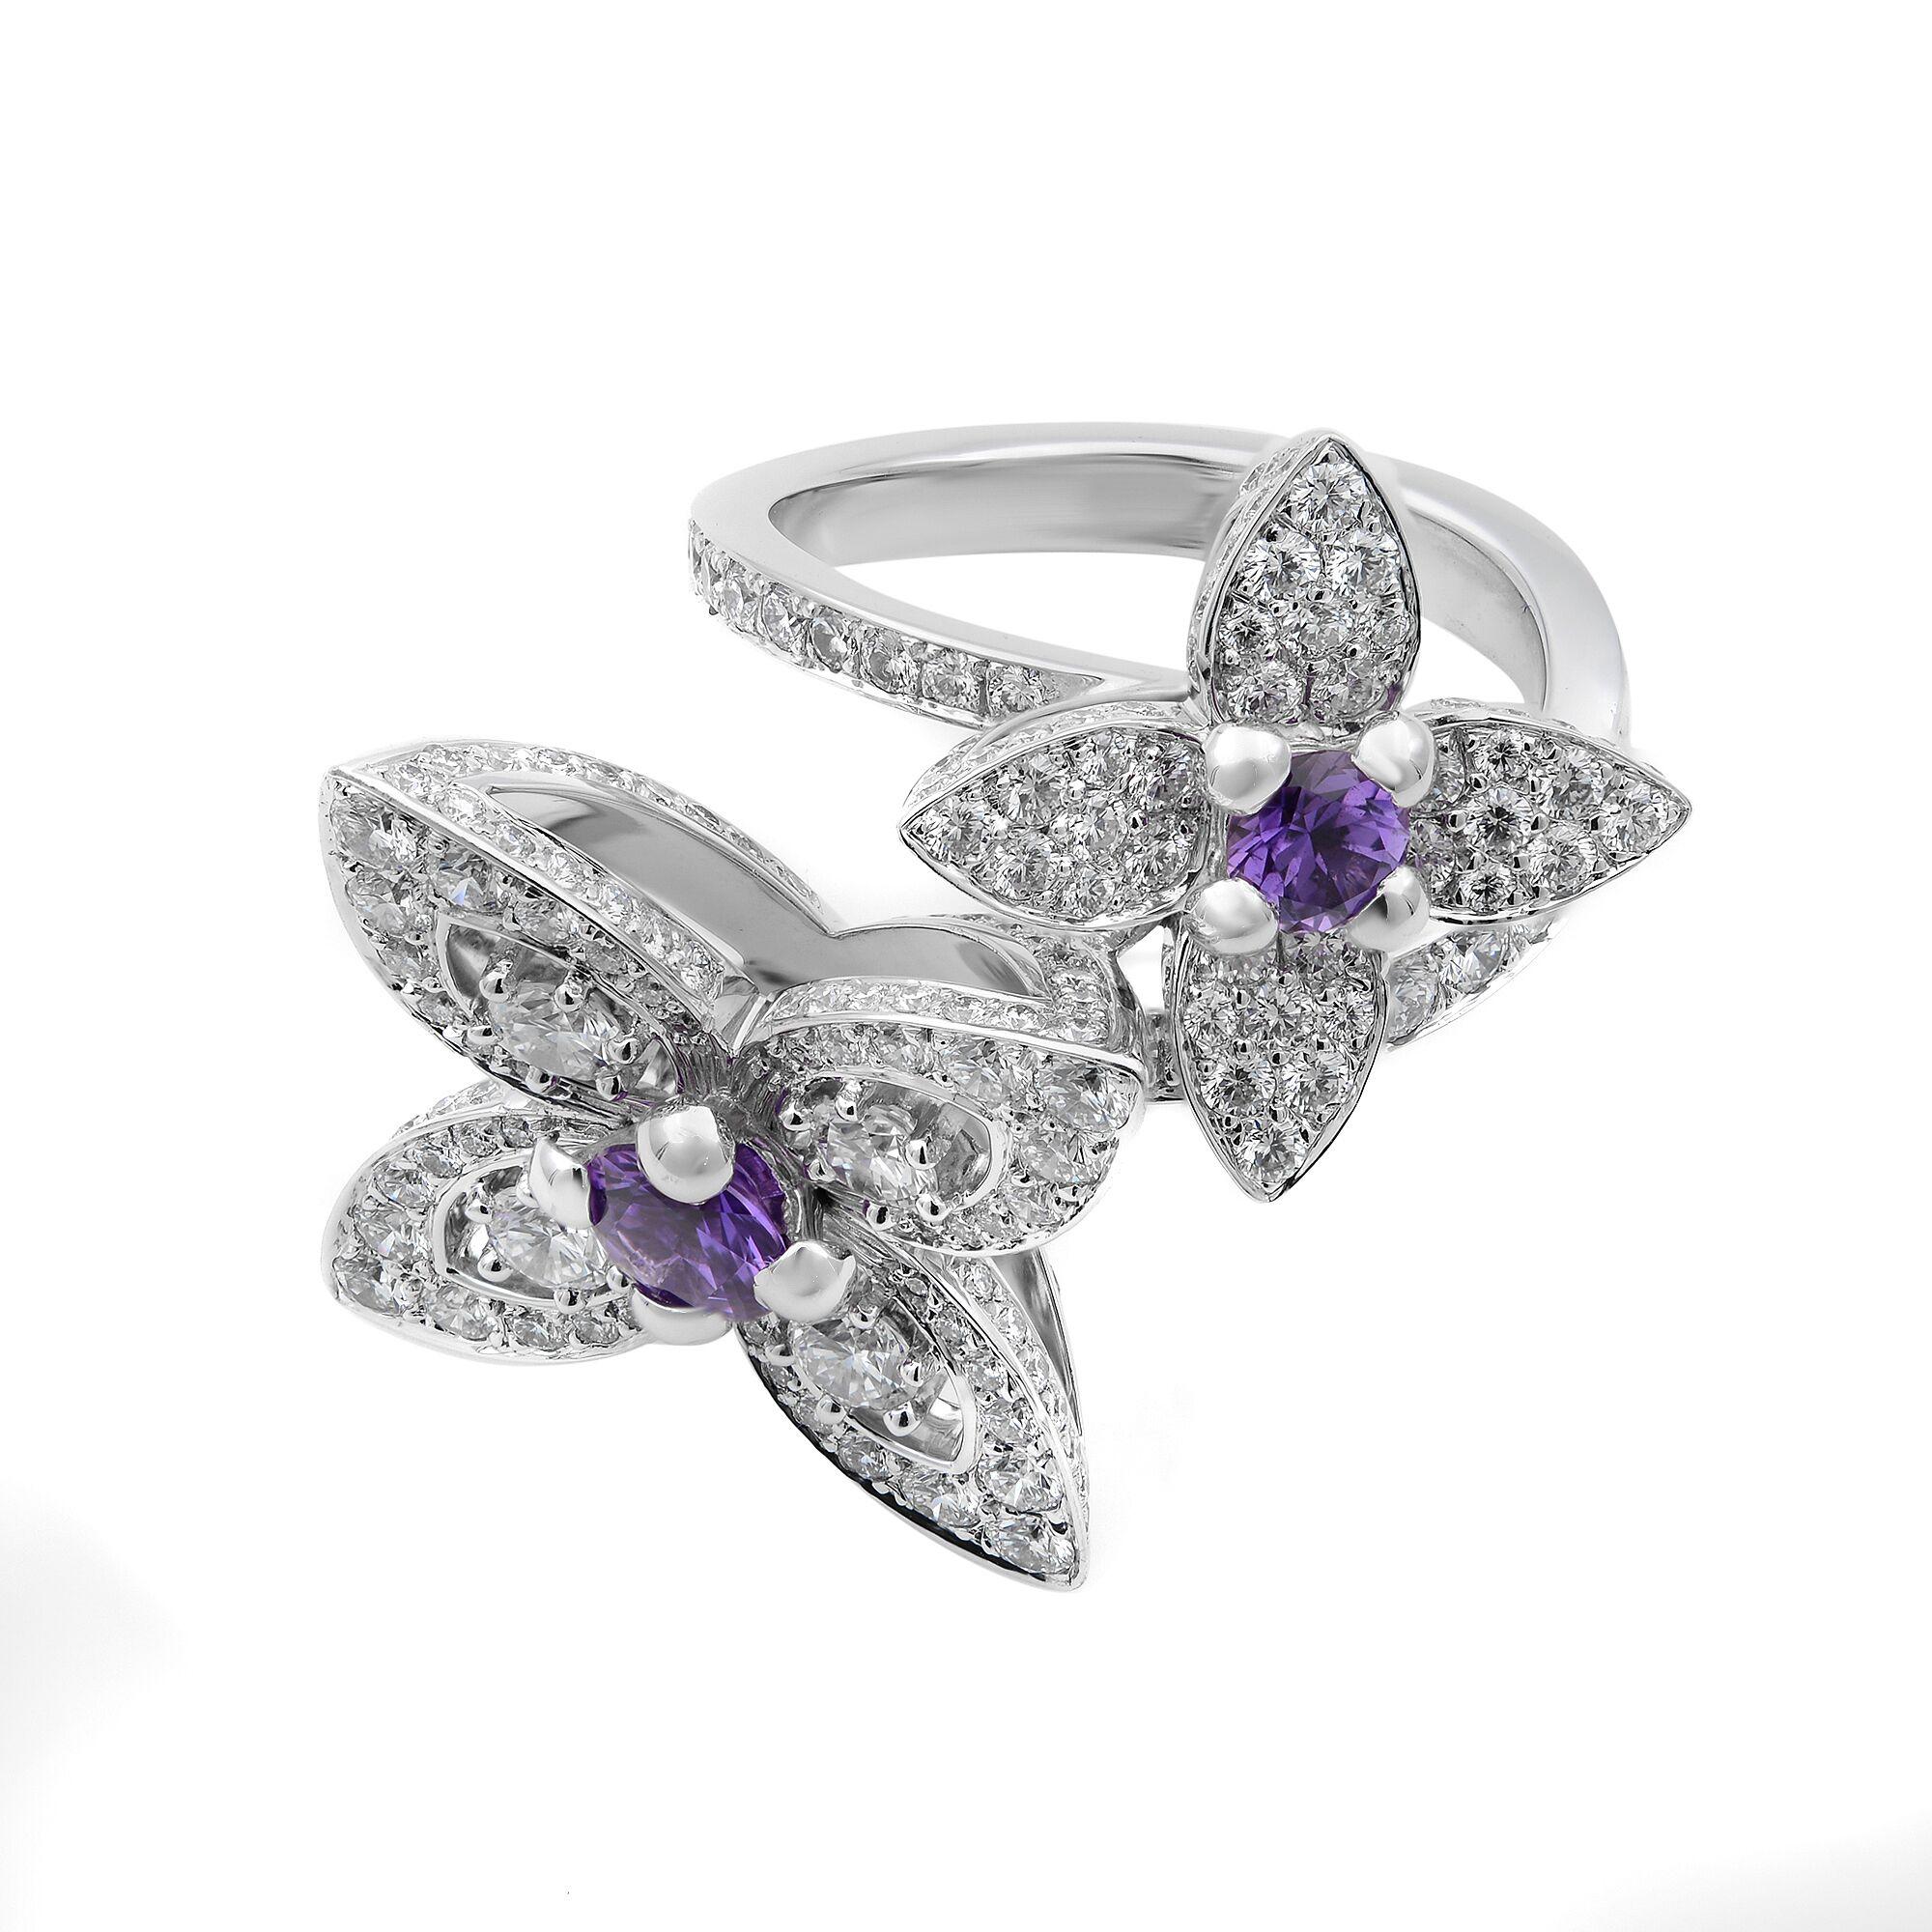 18k White Gold Diamond Amethyst Les Luxuriantes Flowers Ring by Louis Vuitton.
Set with 307 round brilliant cut diamonds VVS1 clarity E color
2 Amethyst Stones
Stamped Hallmarks: Louis Vuitton 750 53
Pre-owned like new, original packaging is not